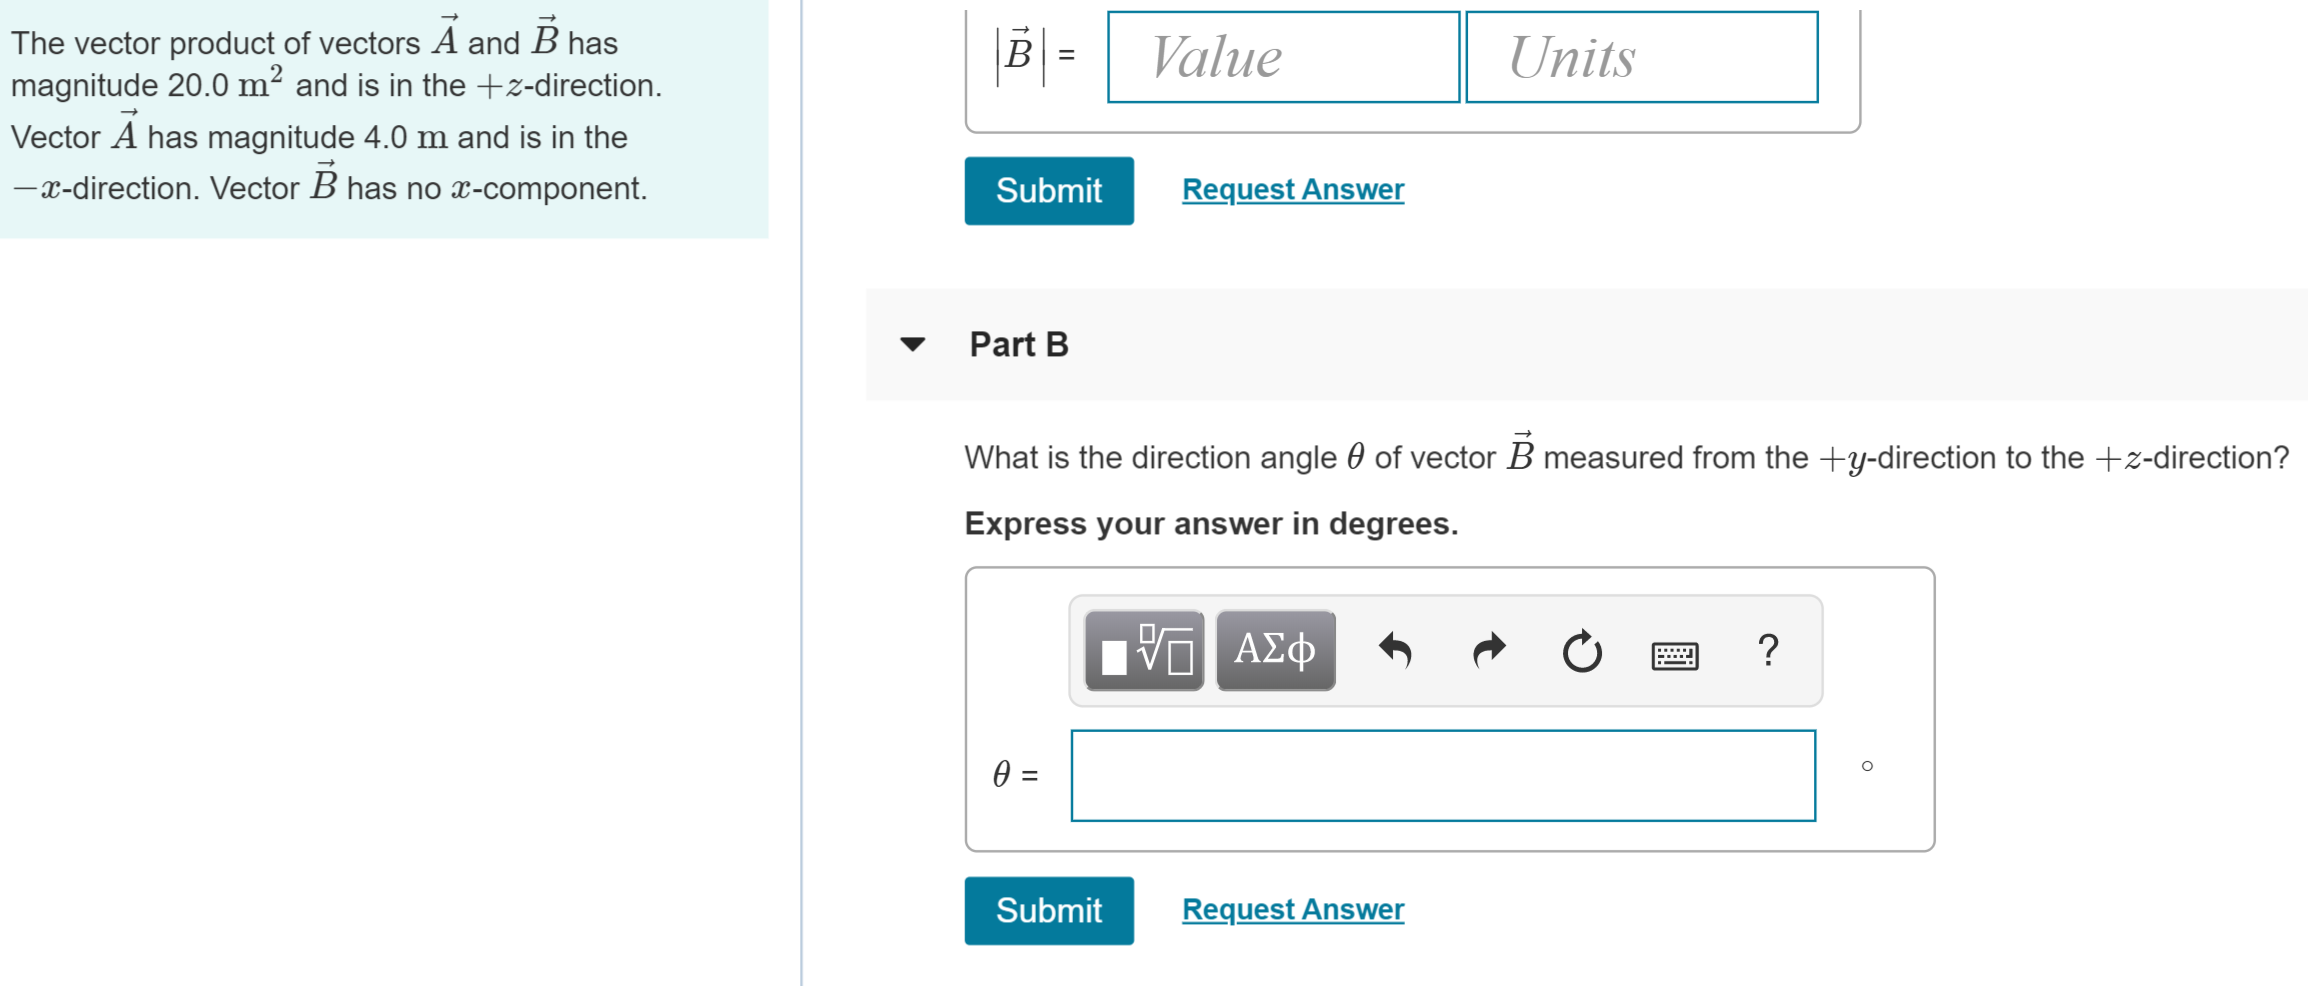 |BValue
The vector product of vectors A and B has
magnitude 20.0 m2 and is in the -direction
Units
Vector A has magnitude 4.0 m and is in the
-x-direction. Vector B has no x-component.
Request Answer
Submit
Part B
of vector B measured from the +y-direction to the +z-direction?
What is the direction angle
Express your answer in degrees
VAd
ΑΣφ
e =
Submit
Request Answer
